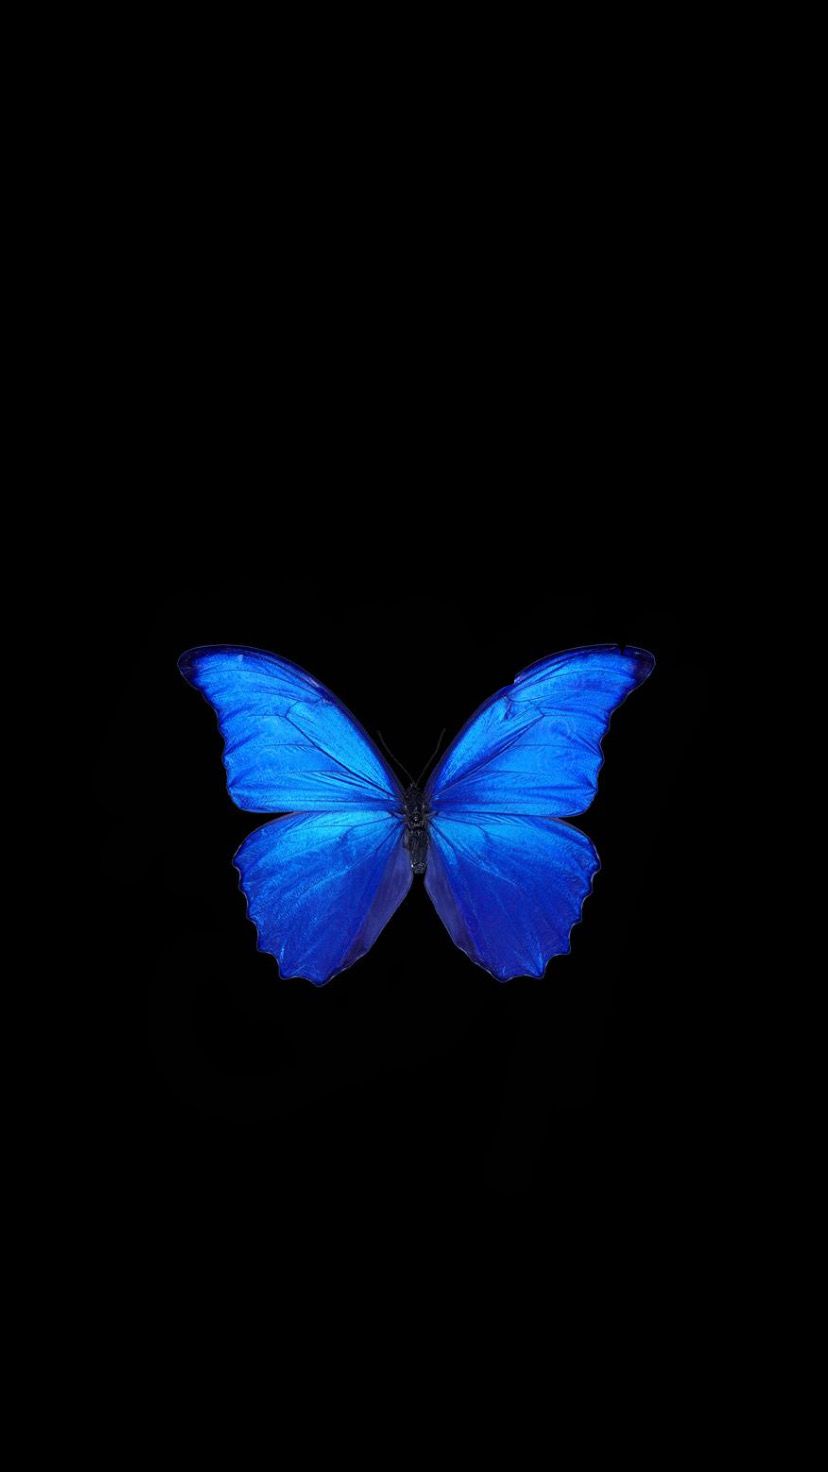 Black and Blue Butterfly Wallpaper Free Black and Blue Butterfly Background